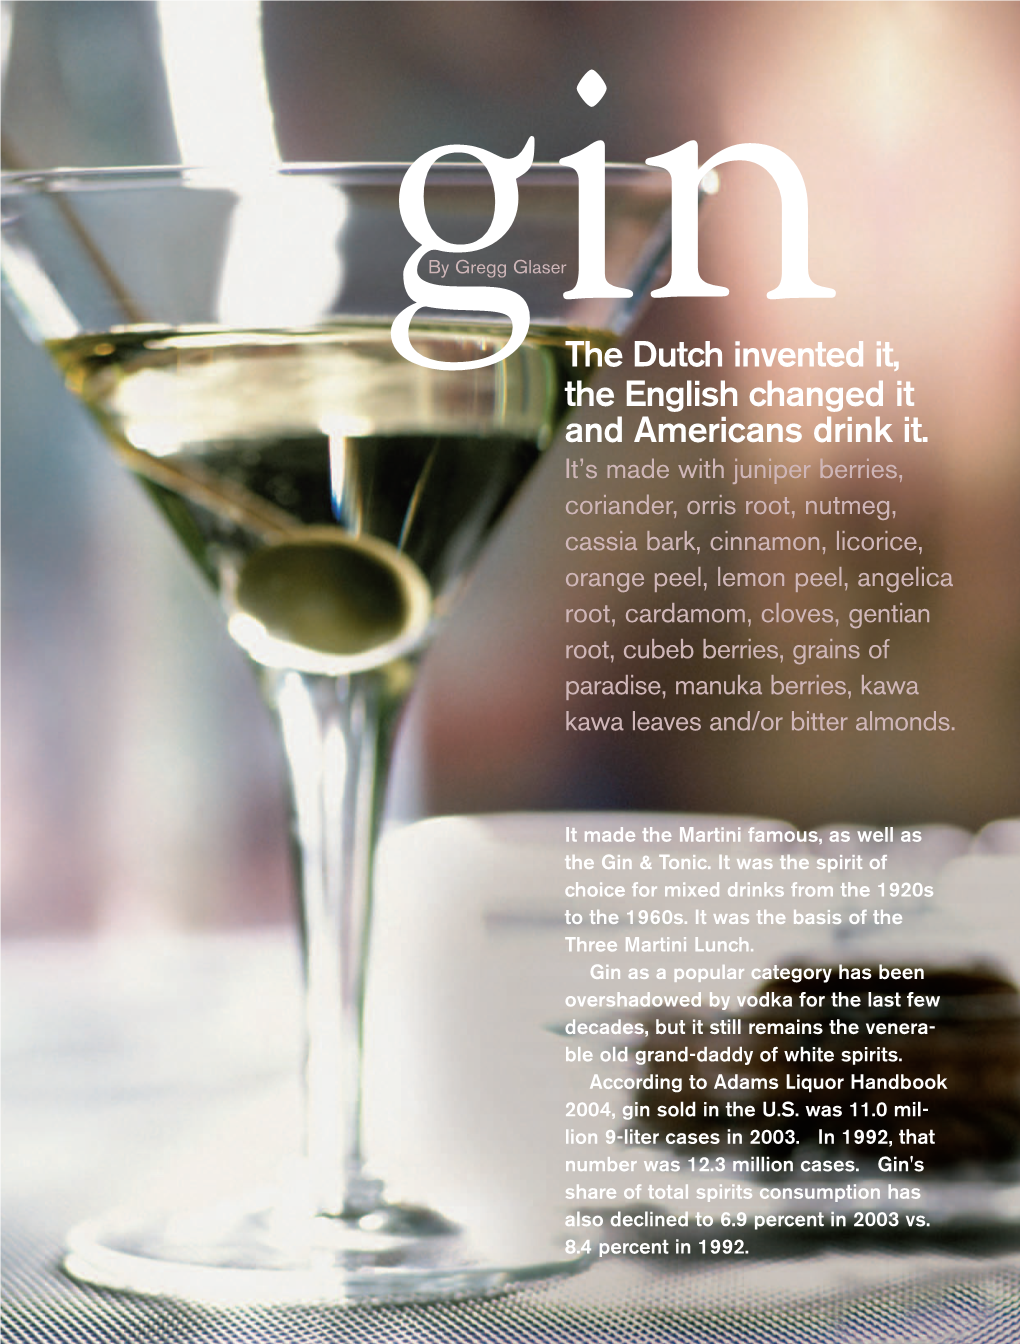 Ginby Gregg Glaser the Dutch Invented It, the English Changed It and Americans Drink It